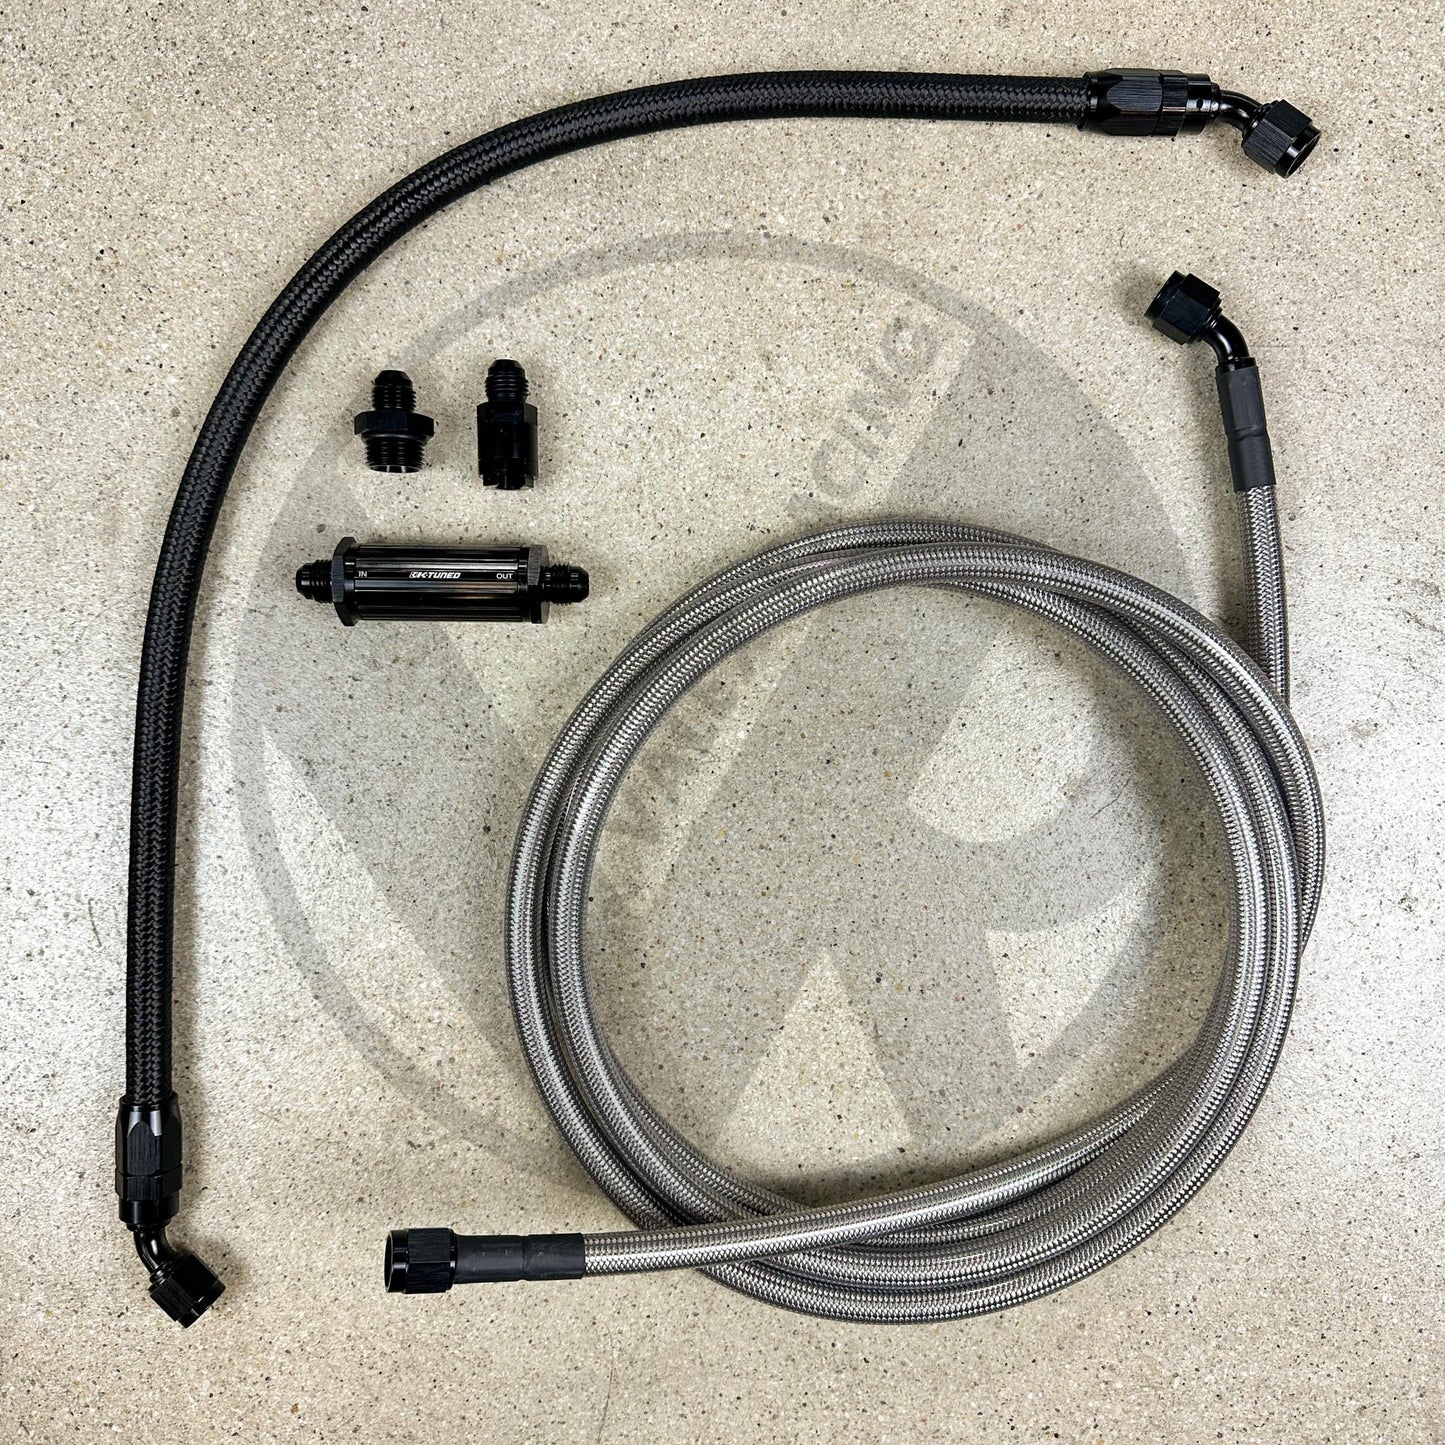 96-01 Acura Integra DC2 K Swap Tucked Stainless Steel Fuel Feed Line System K-Tuned Filter -6 Silver